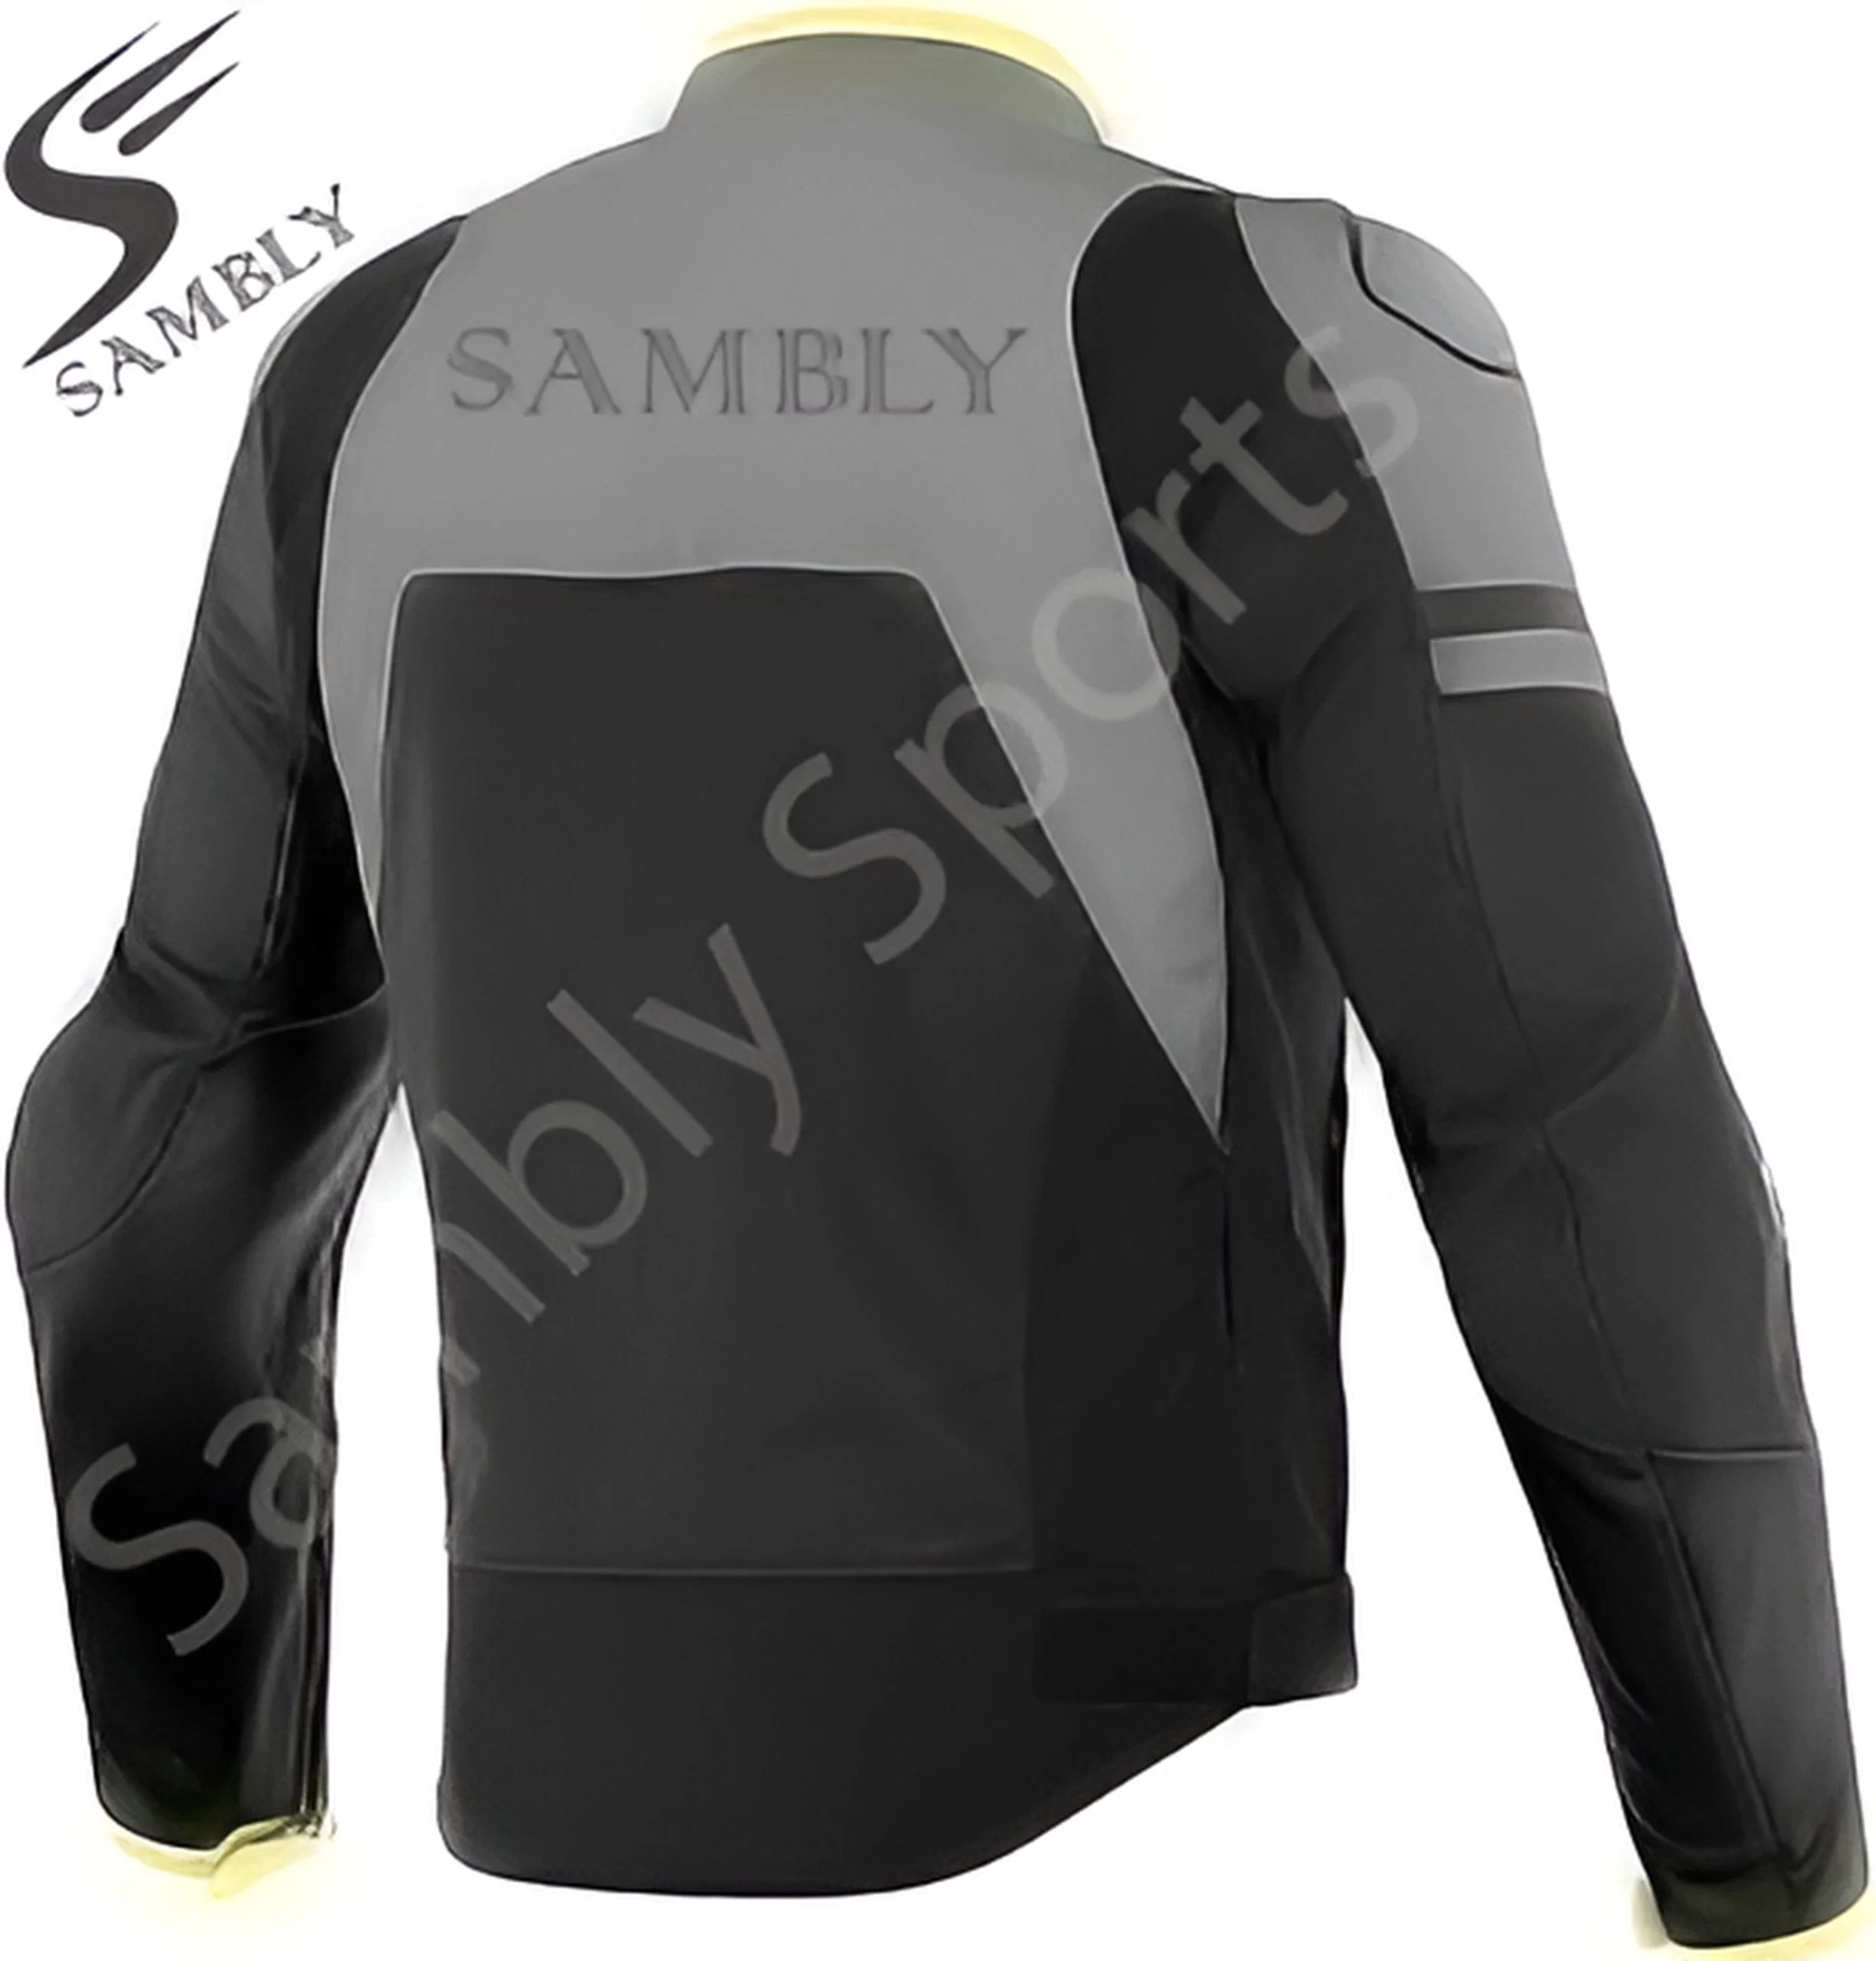 Back view of the Motorbike Textile Jacket SS-504 by Sambly Sports